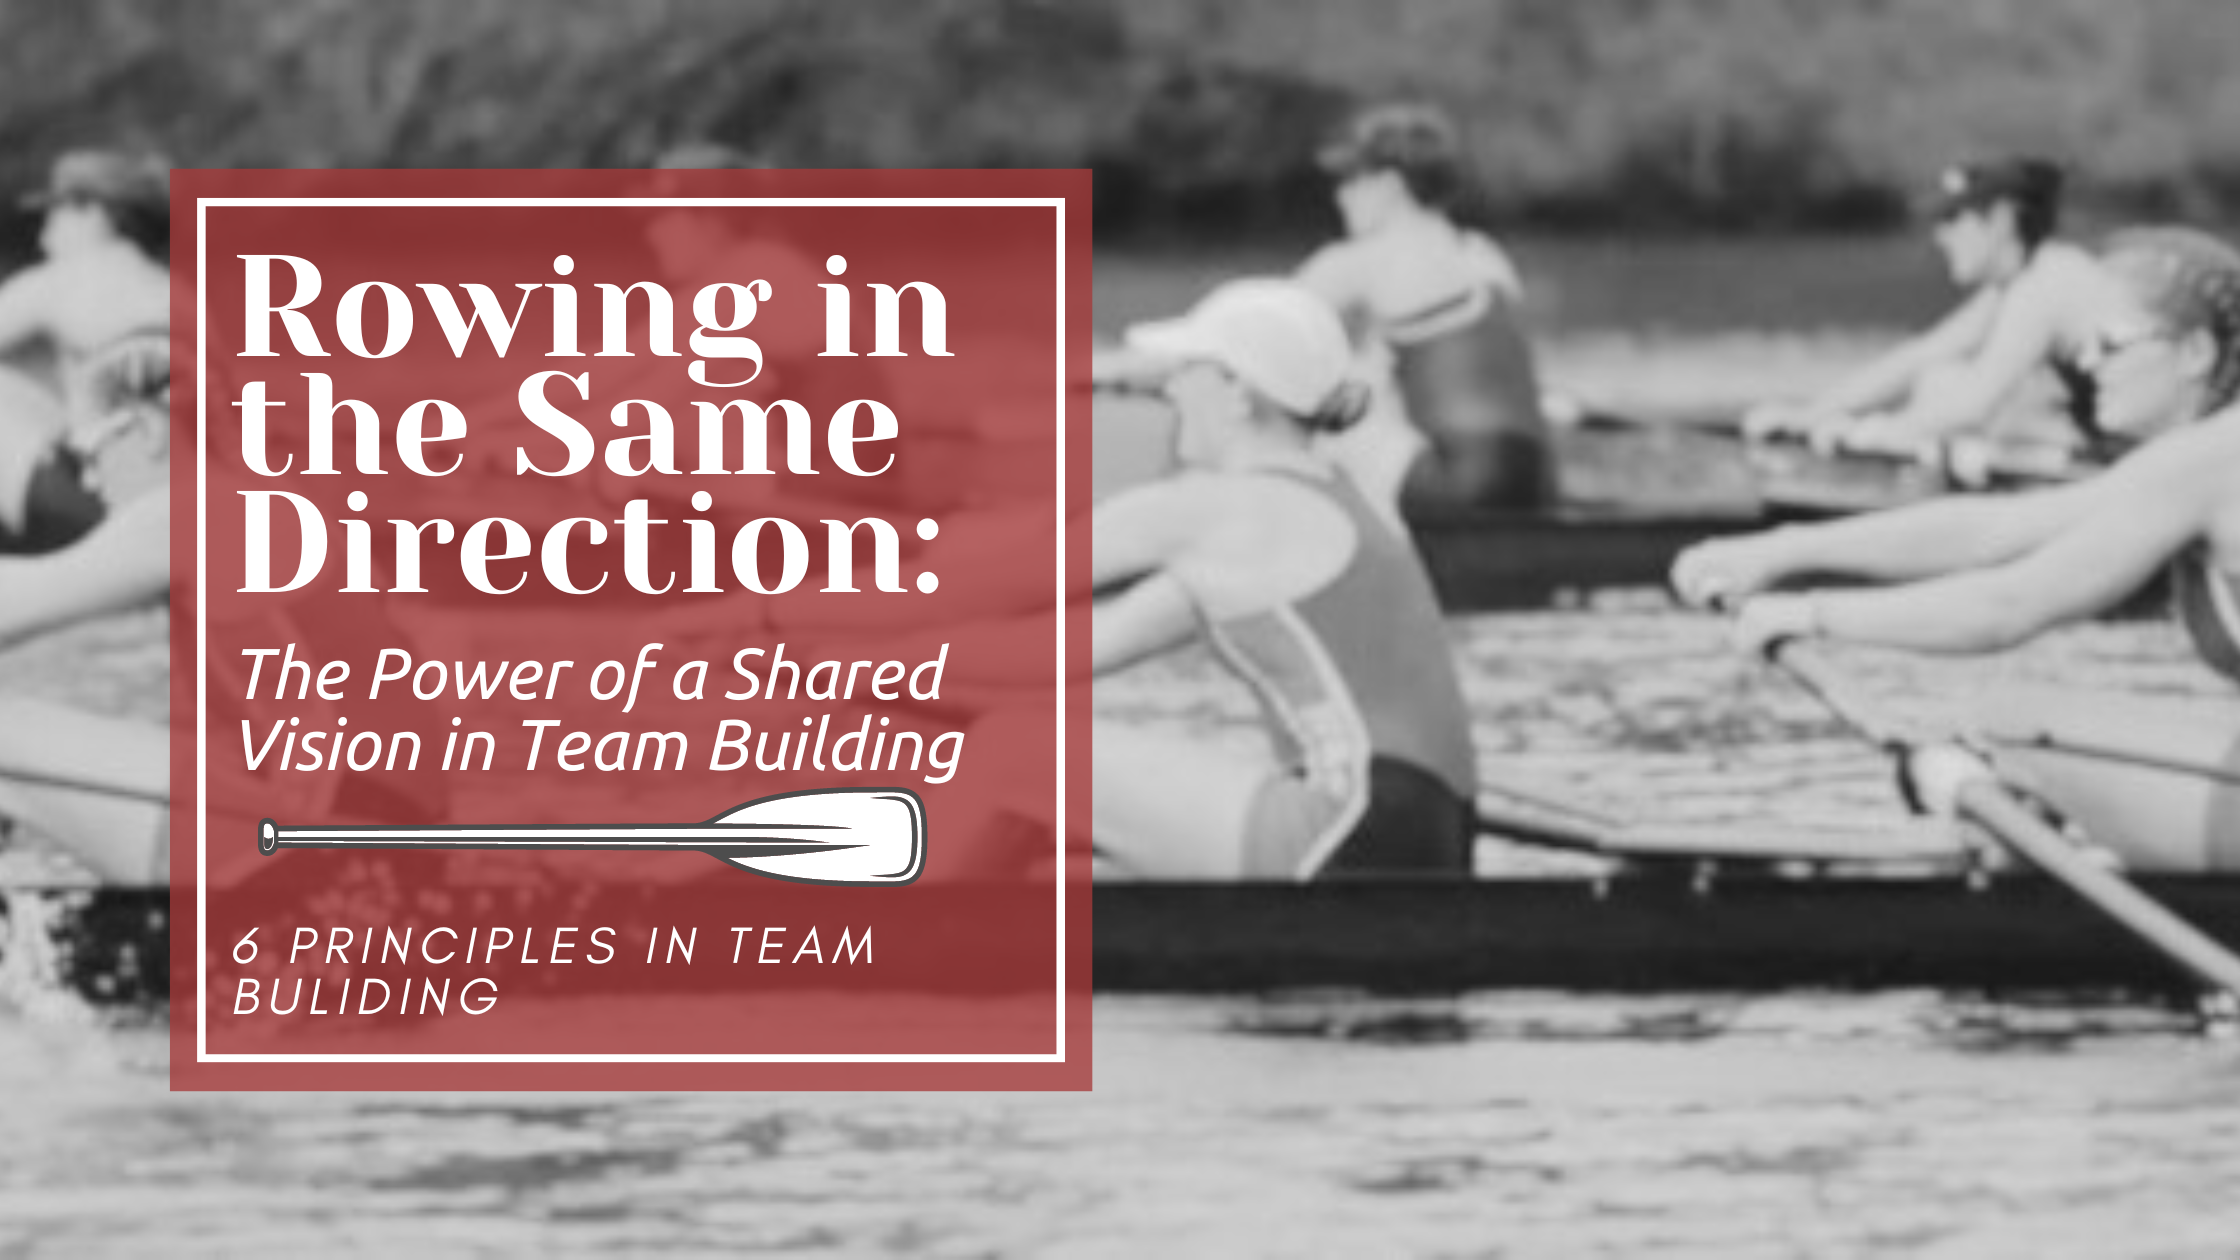 Rowing in the Same Direction: The Power of a Shared Vision in Team Building